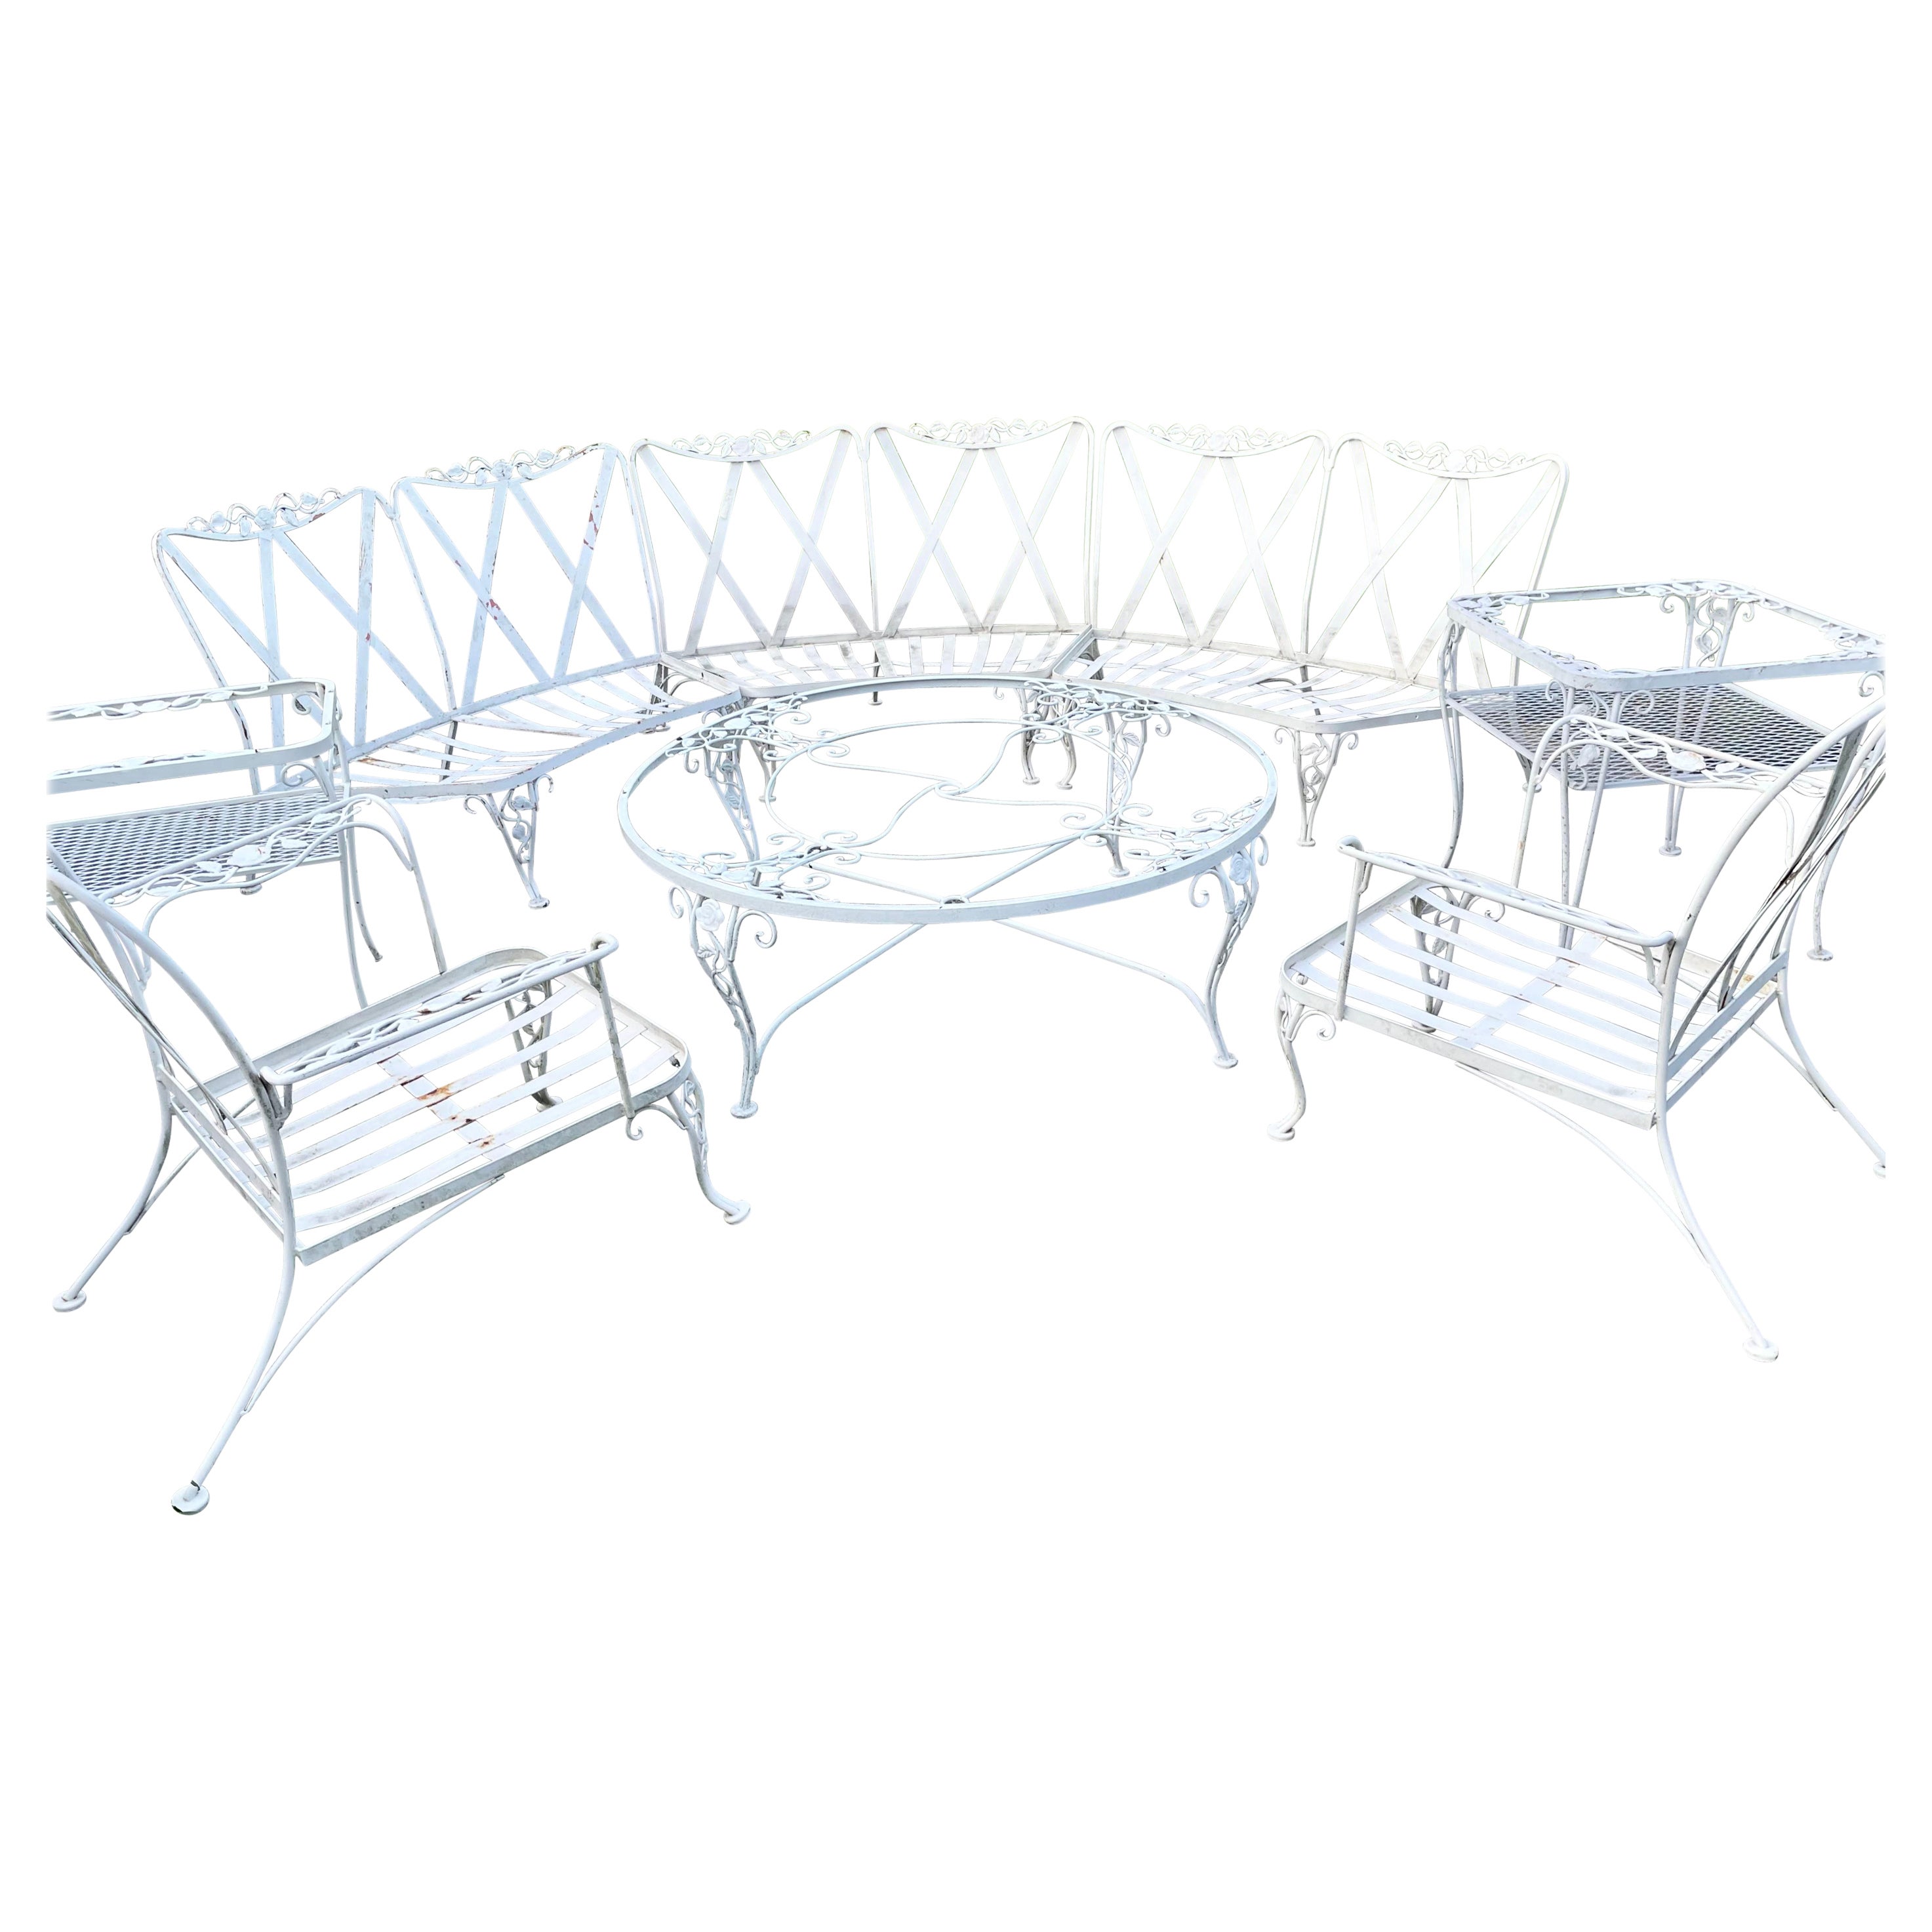 Wrought Iron Outdoor Patio Furniture By Woodard